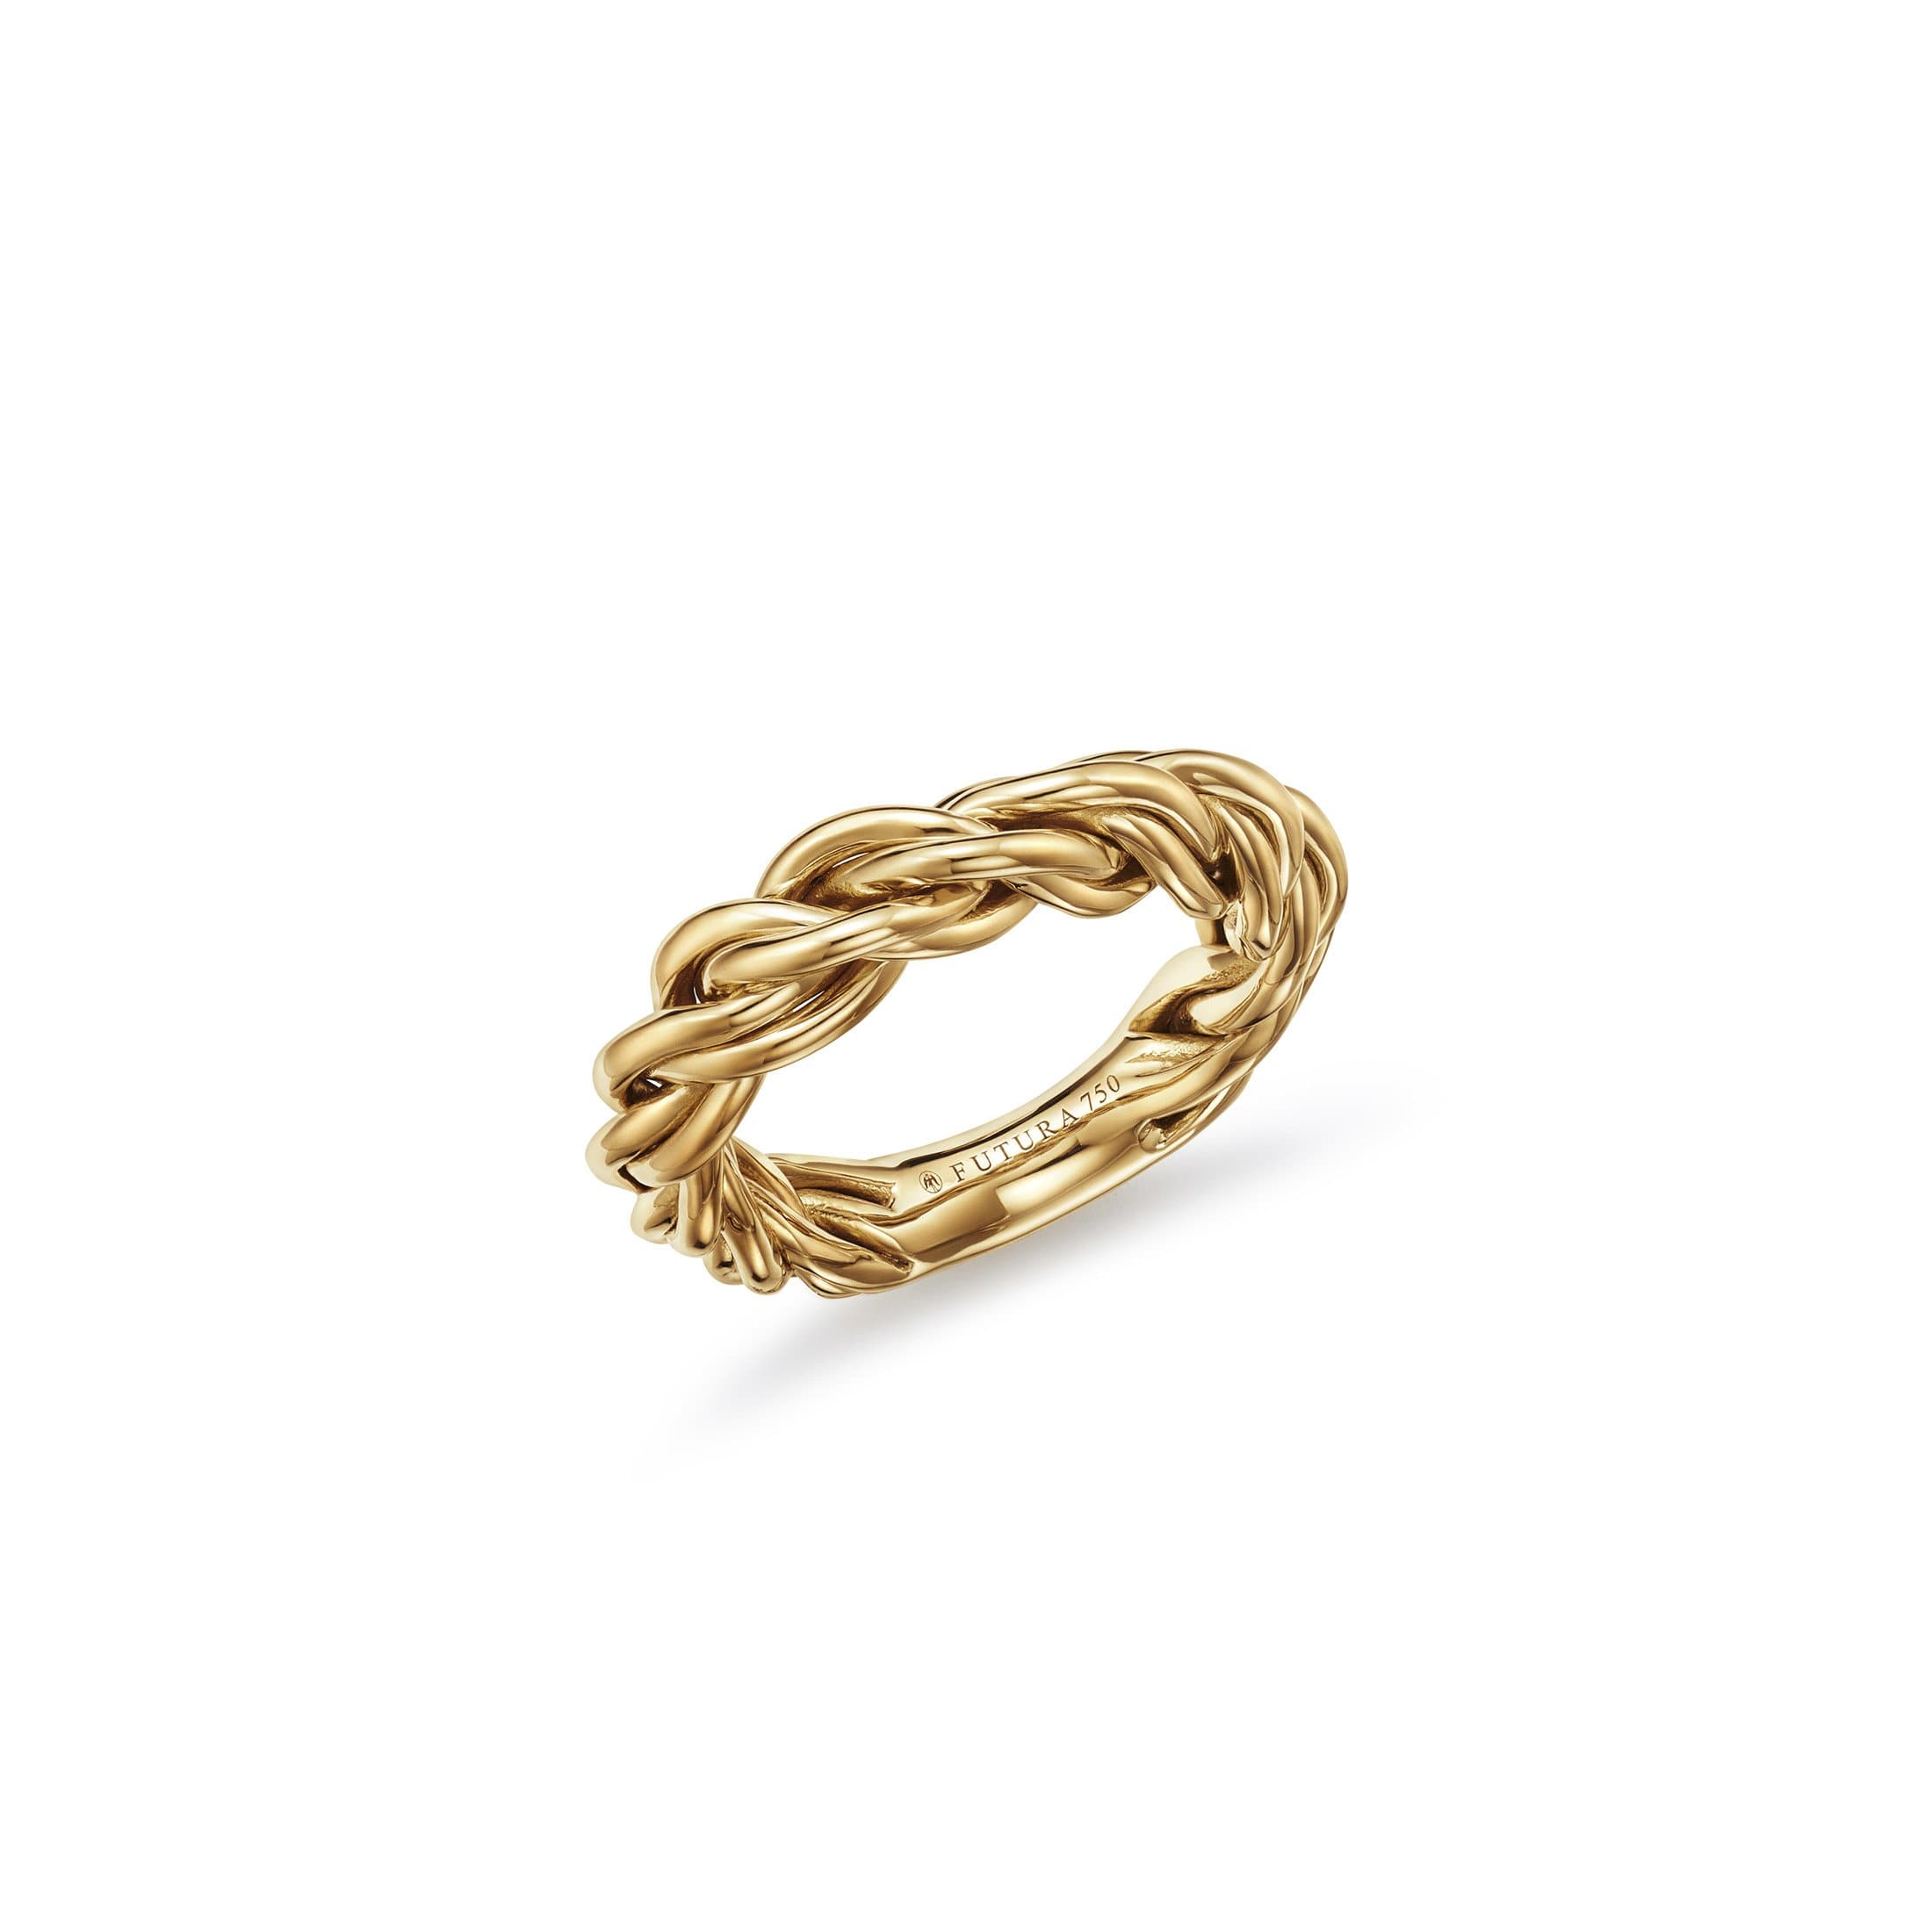 Astrid Ring - Ethically Sourced Gold Ring Made in NYC